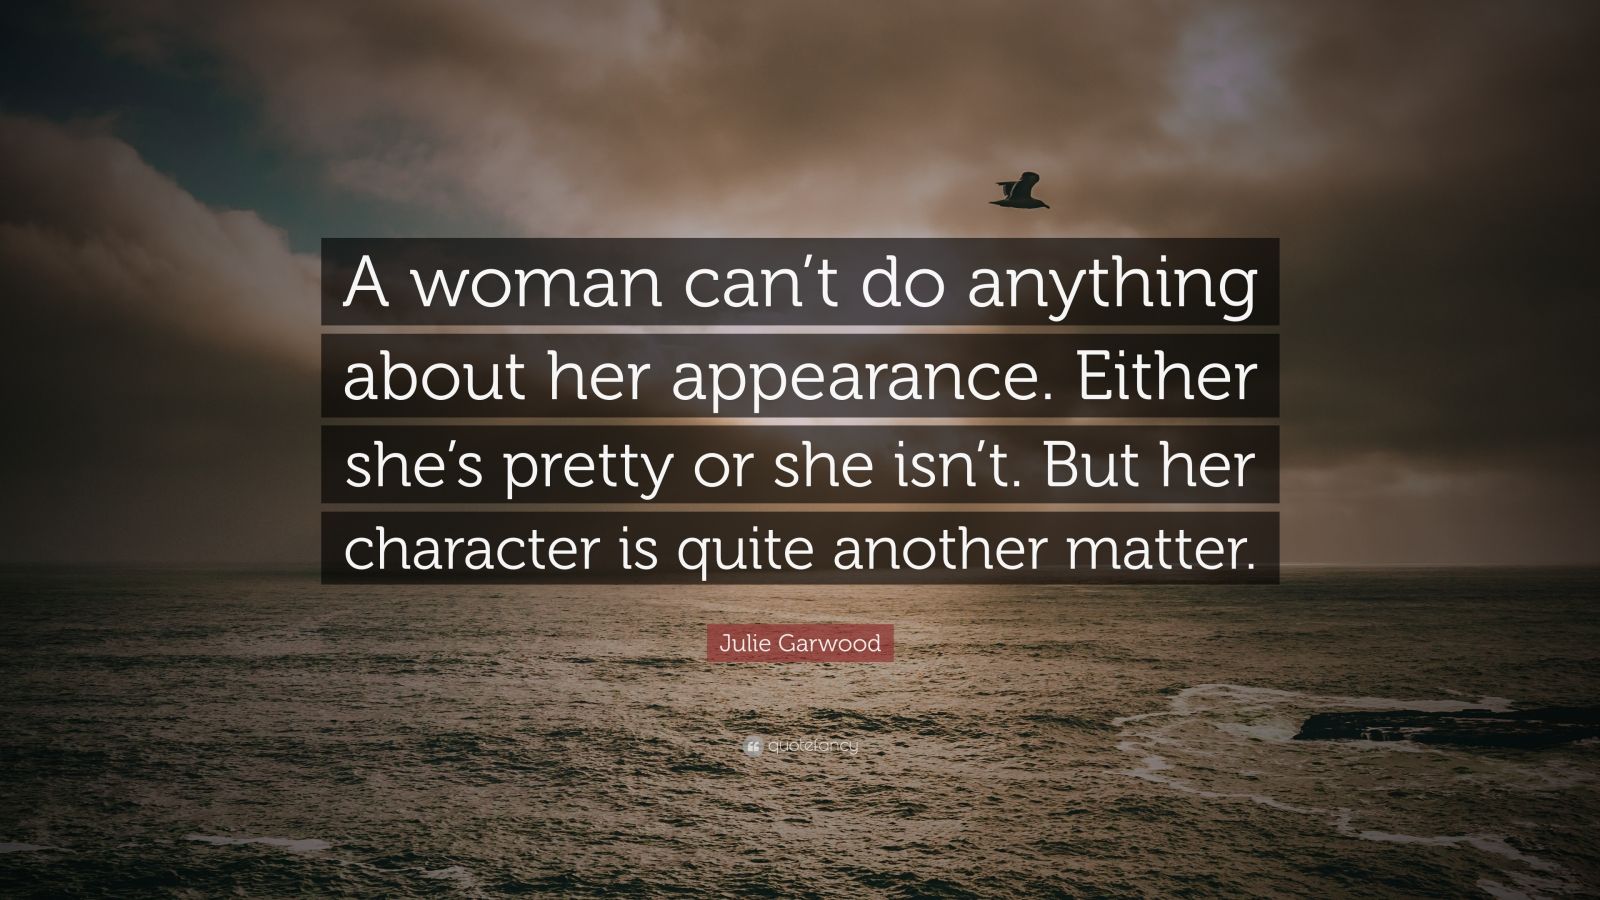 Julie Garwood Quote: “A woman can’t do anything about her appearance ...